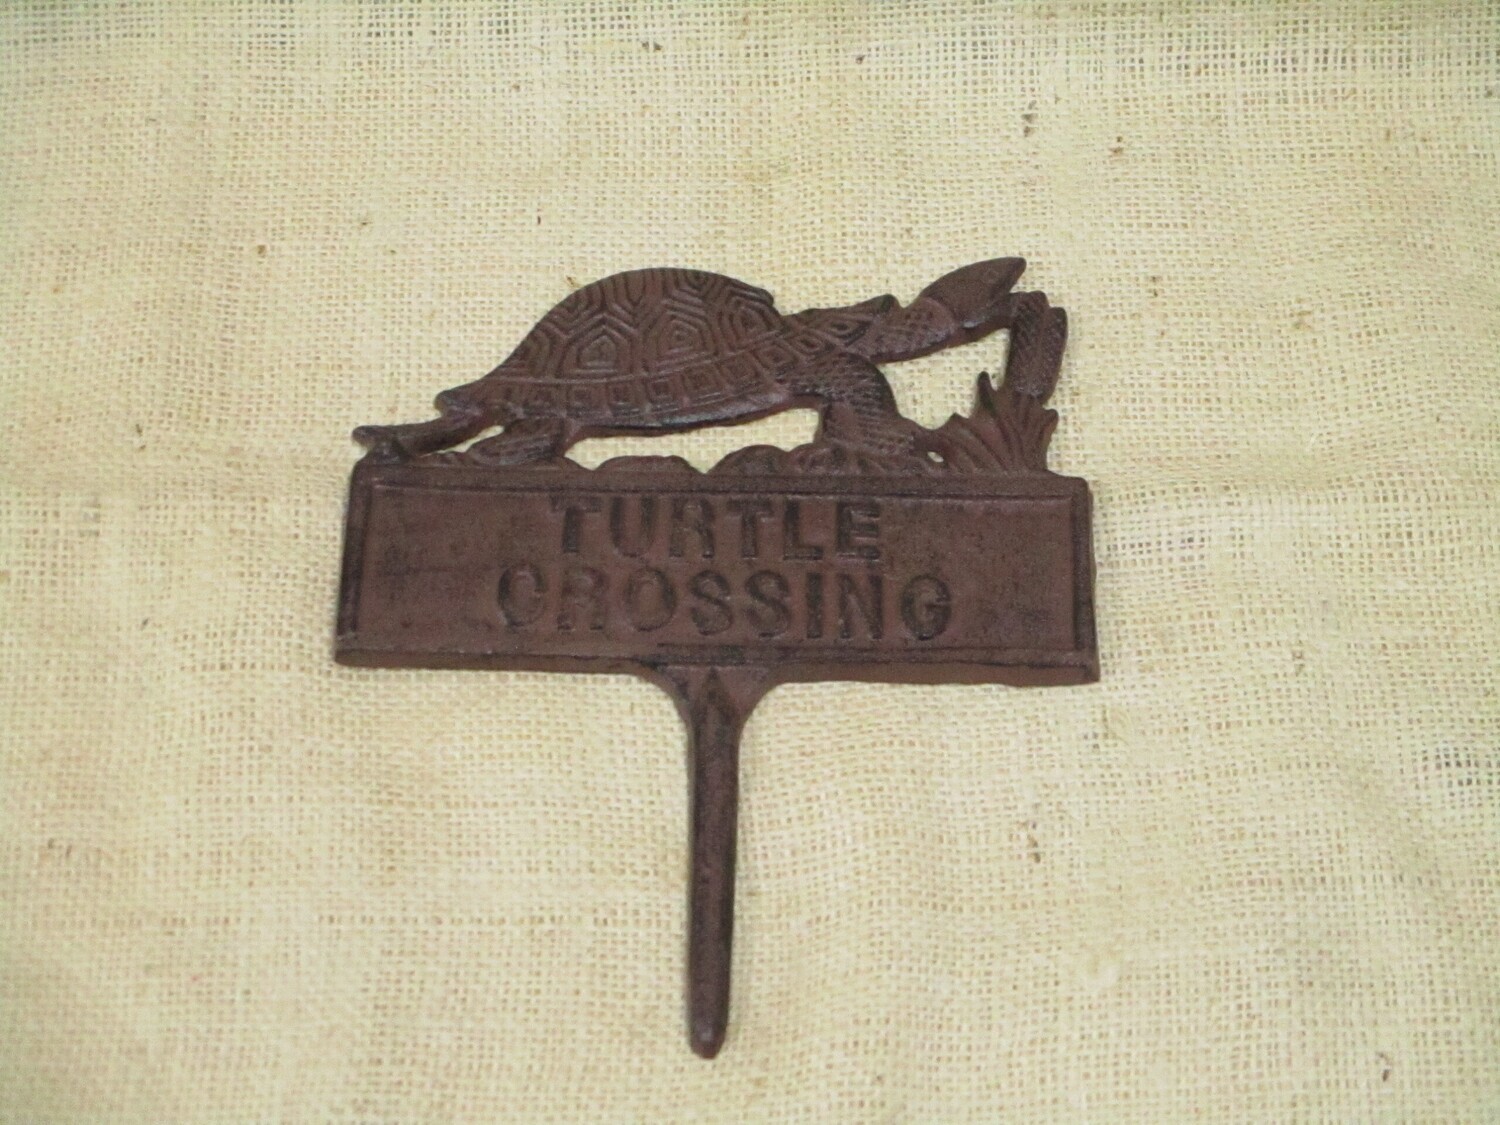 CAST IRON TURTLE CROSSING SIGN